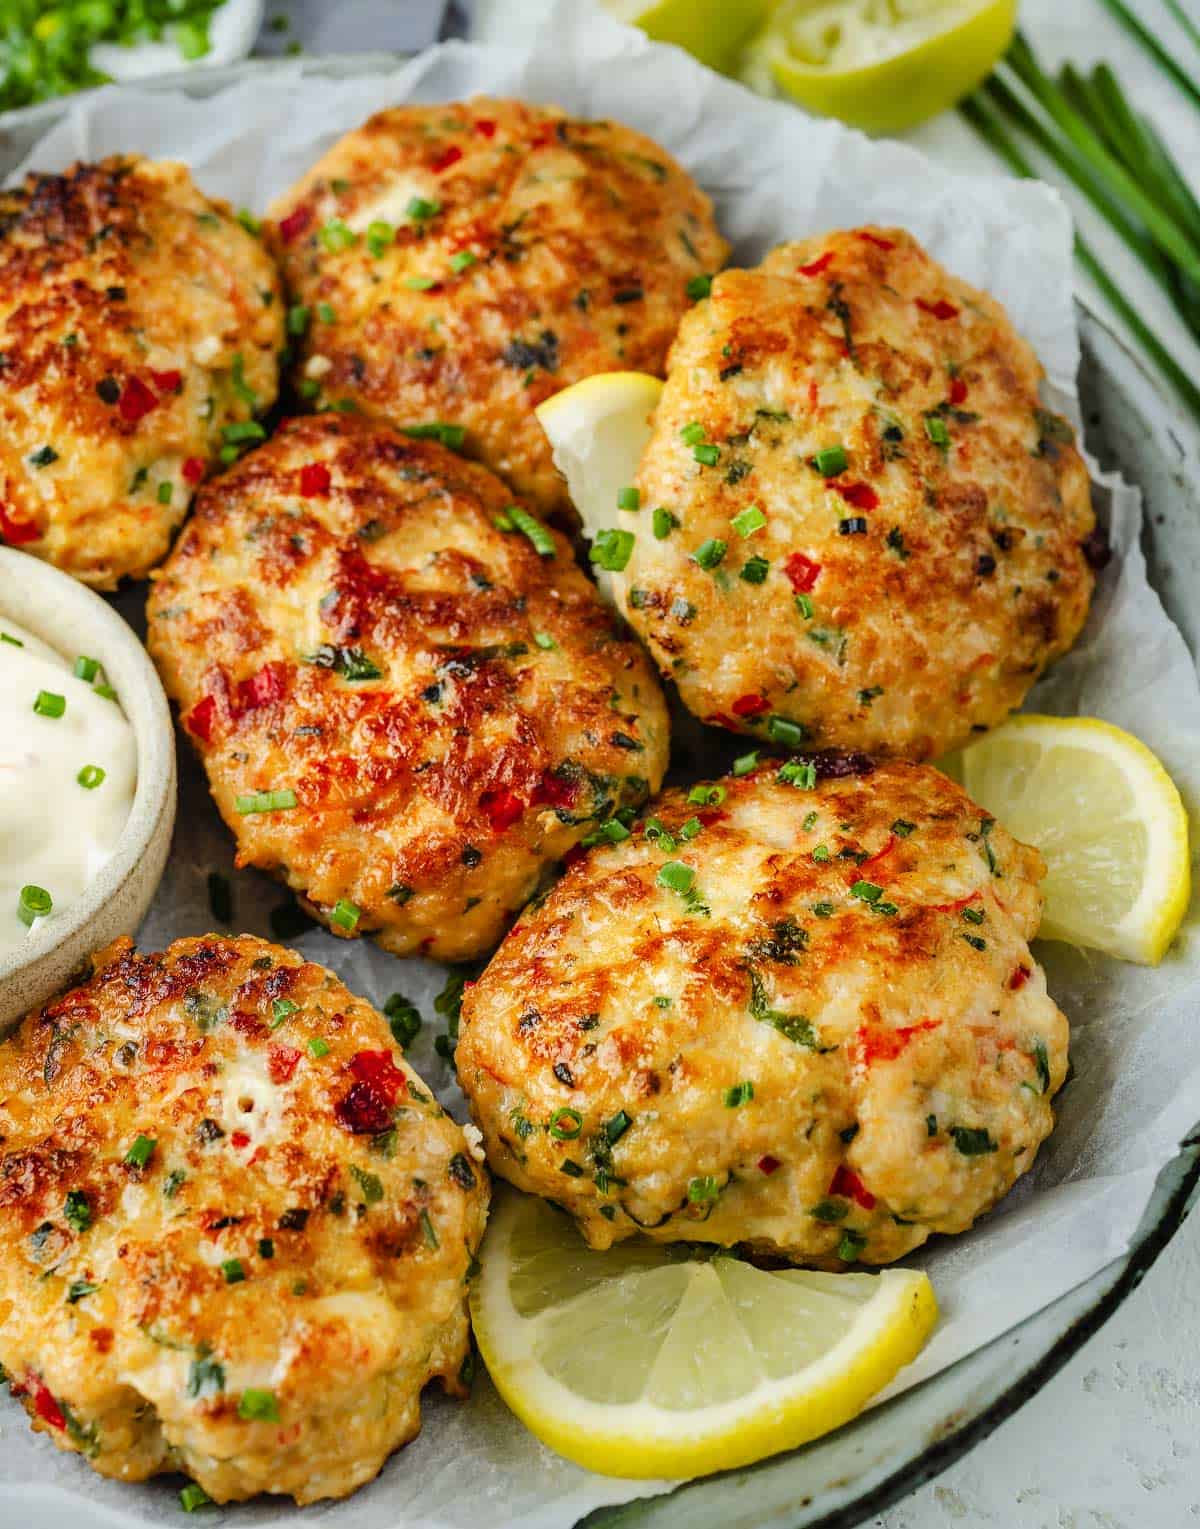 Delicious shrimp cakes plated with lemon slices.